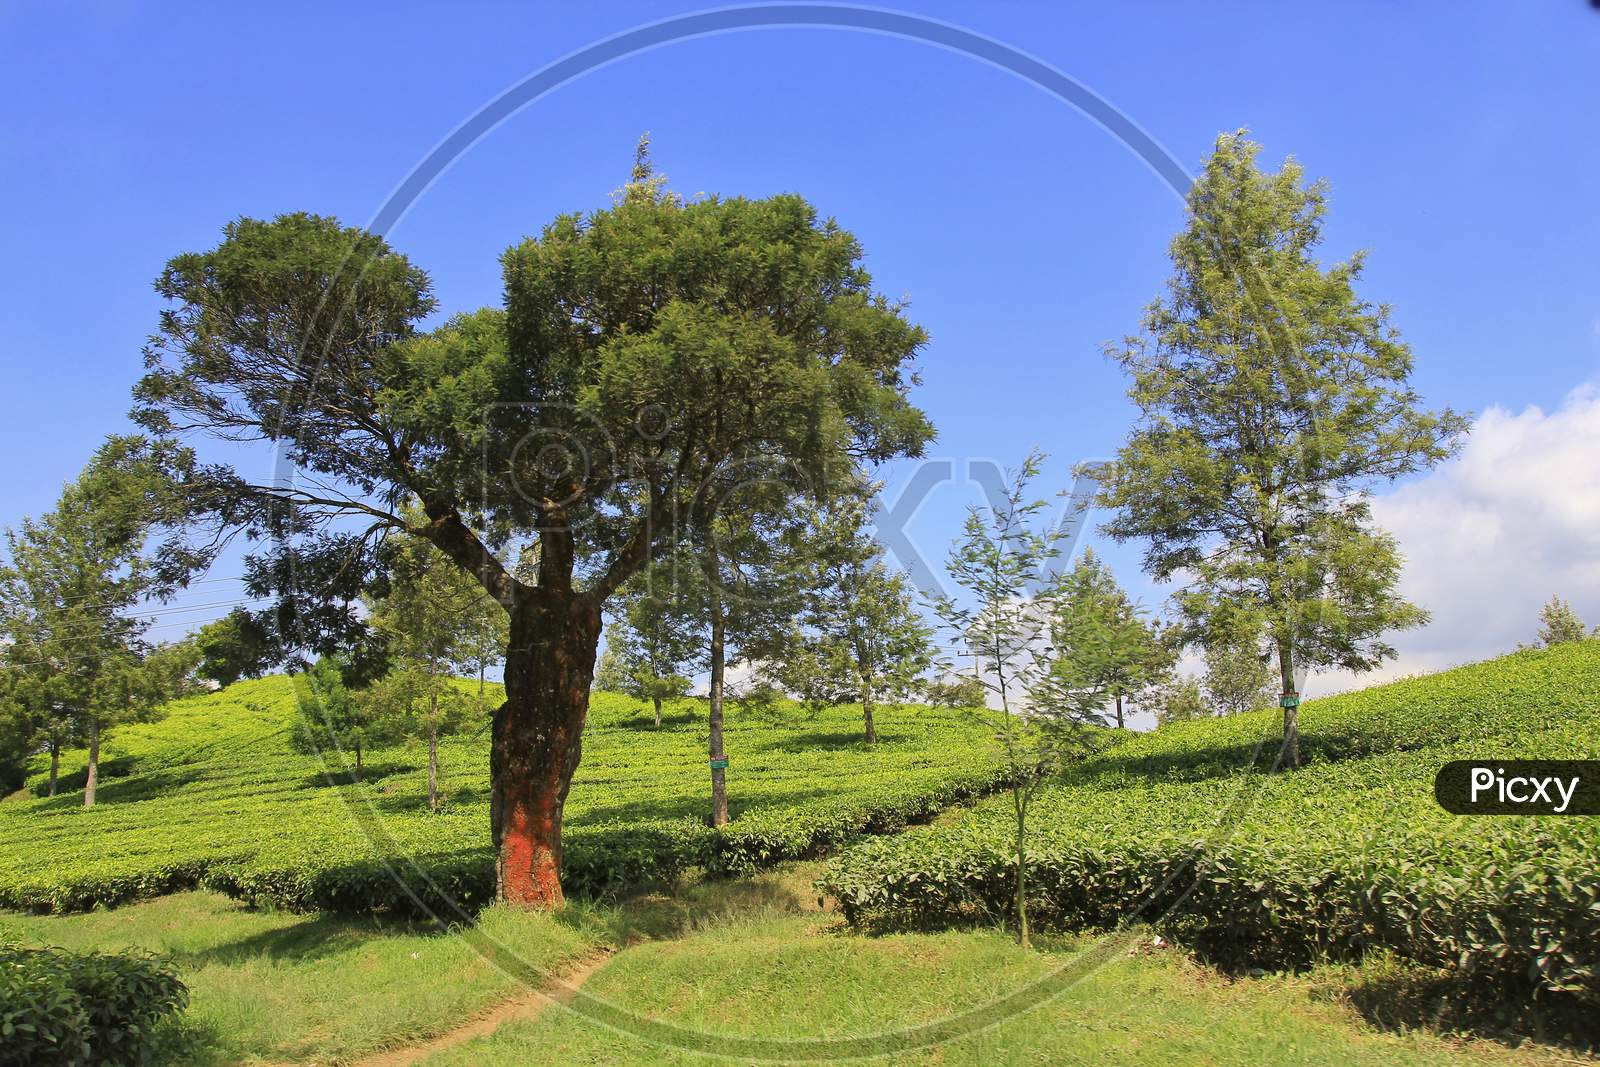 The large tea tree between the stretches of the tea plantation